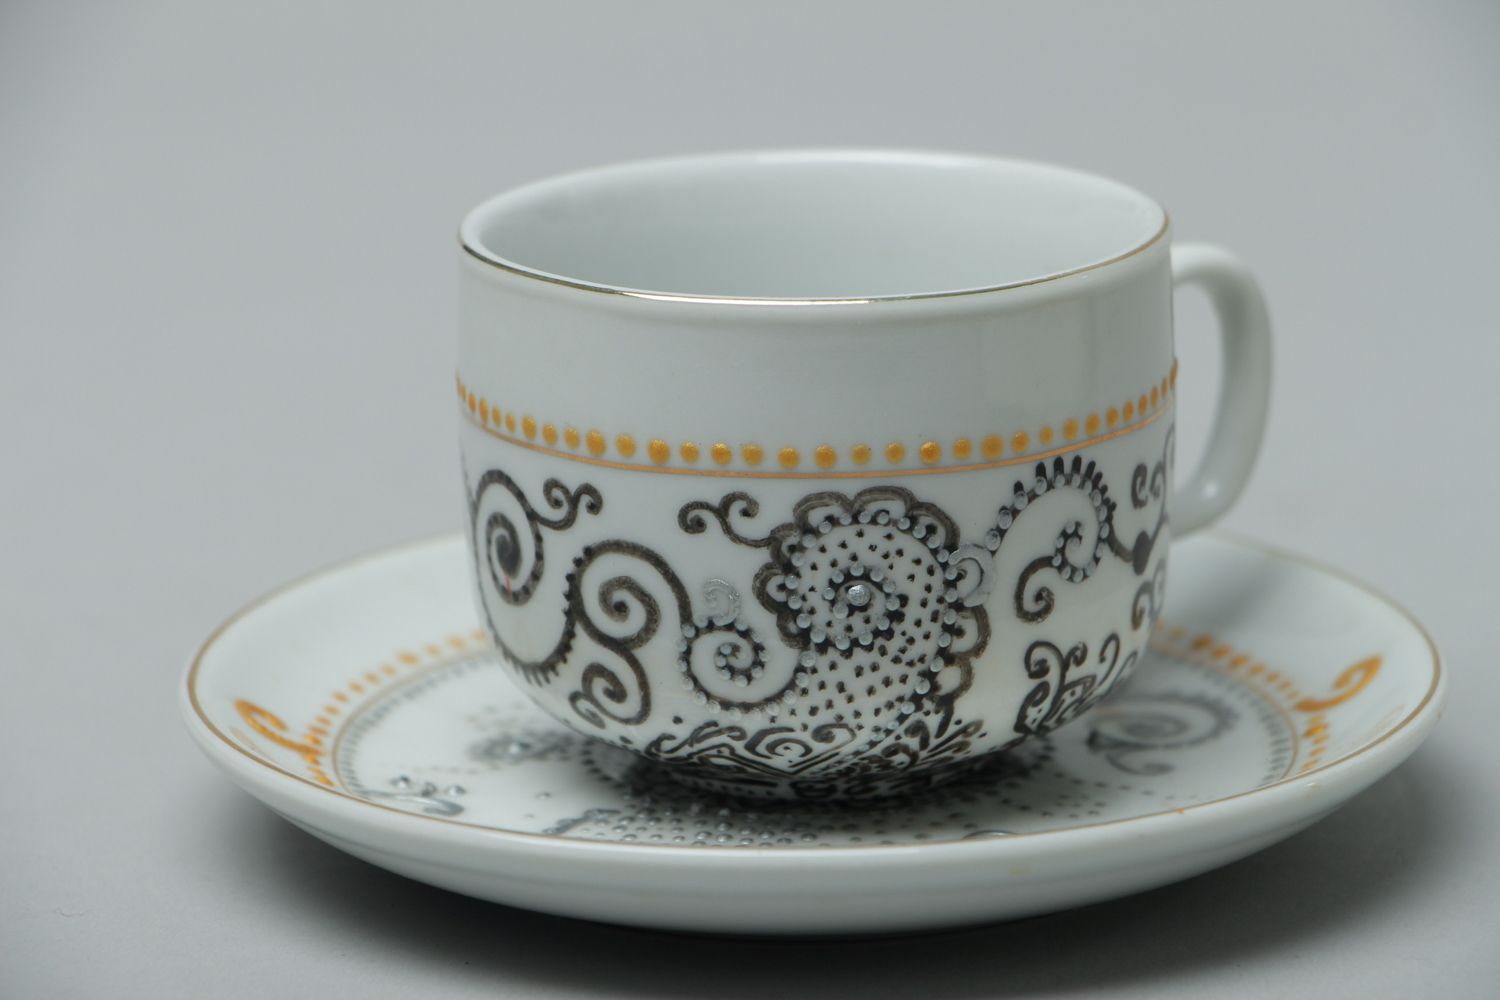 Cup Japanese with the saucer in white, grey colors with handmade pattern 0,63 lb photo 1